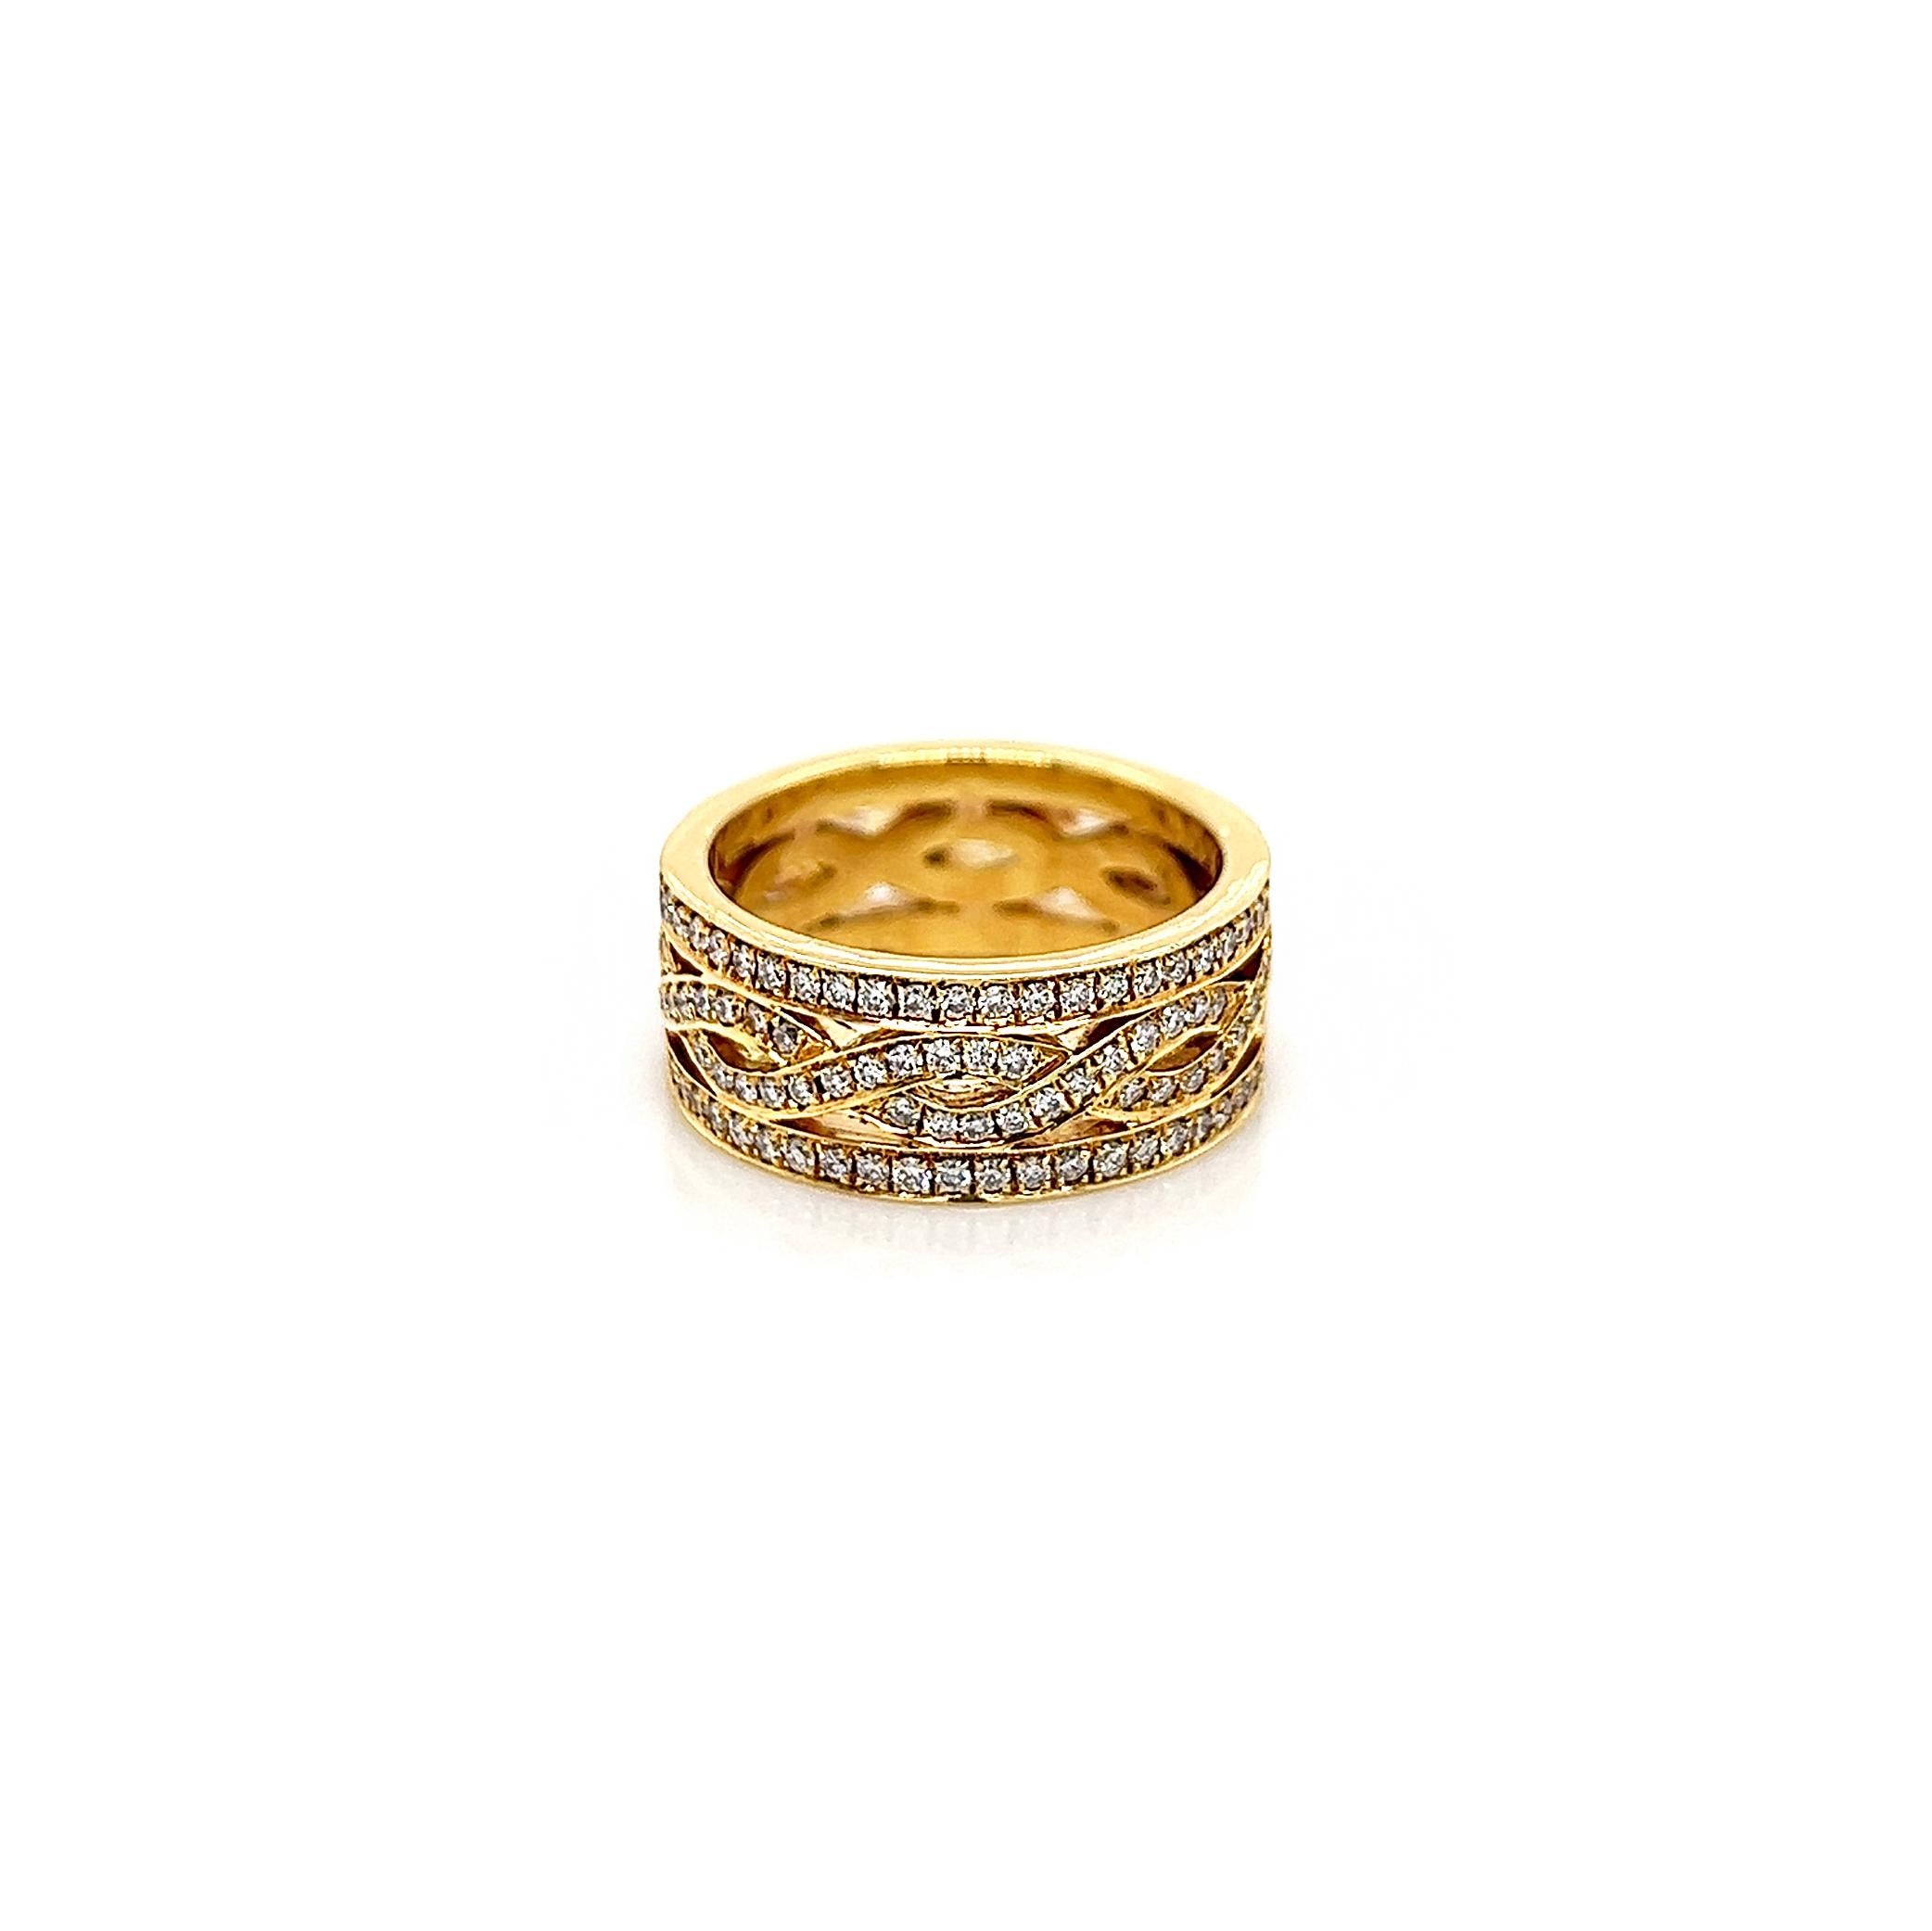 1.46 Carat Diamond Pave-Set Ladies Ring in 18K Yellow Gold
Accentuate the moment with this beautiful yellow gold diamond ring. Shimmering round brilliant diamonds encircle this elegant eternity. Truly the perfect statement piece for everyday!